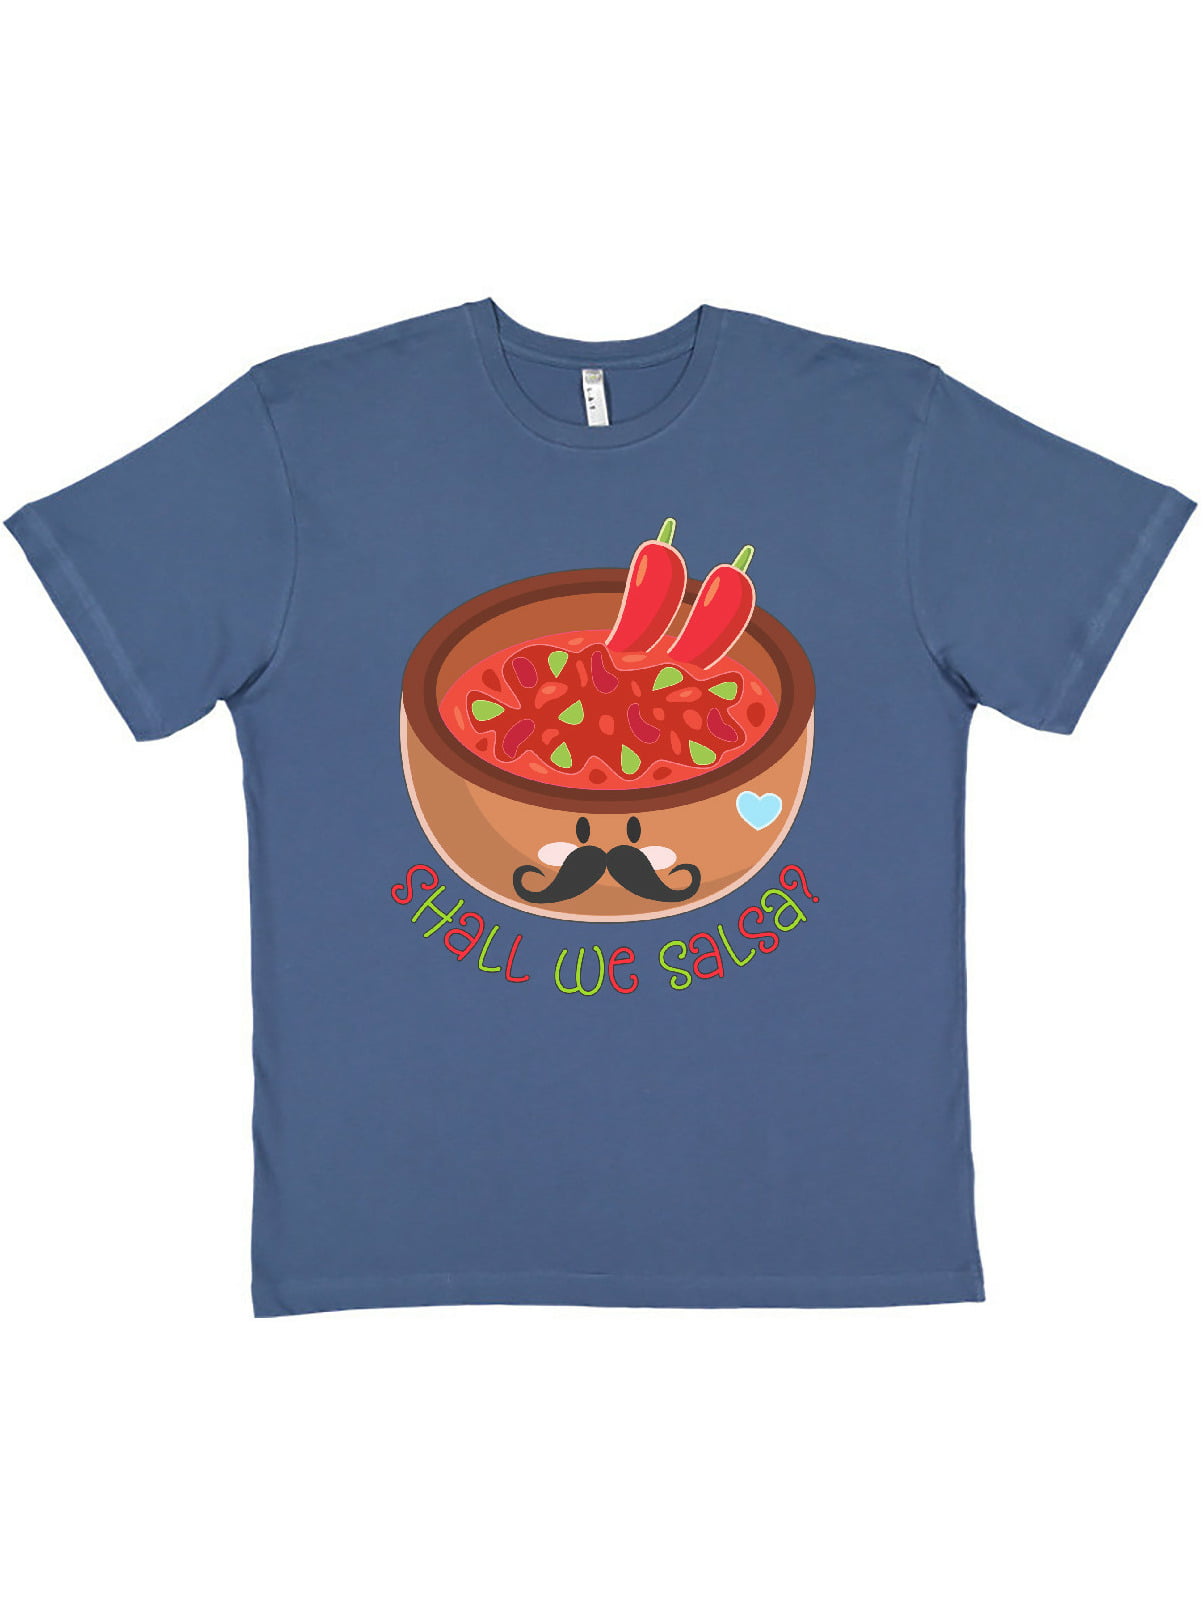 spicy food for life I like spicy food World is a spice Men's heavyweight tee